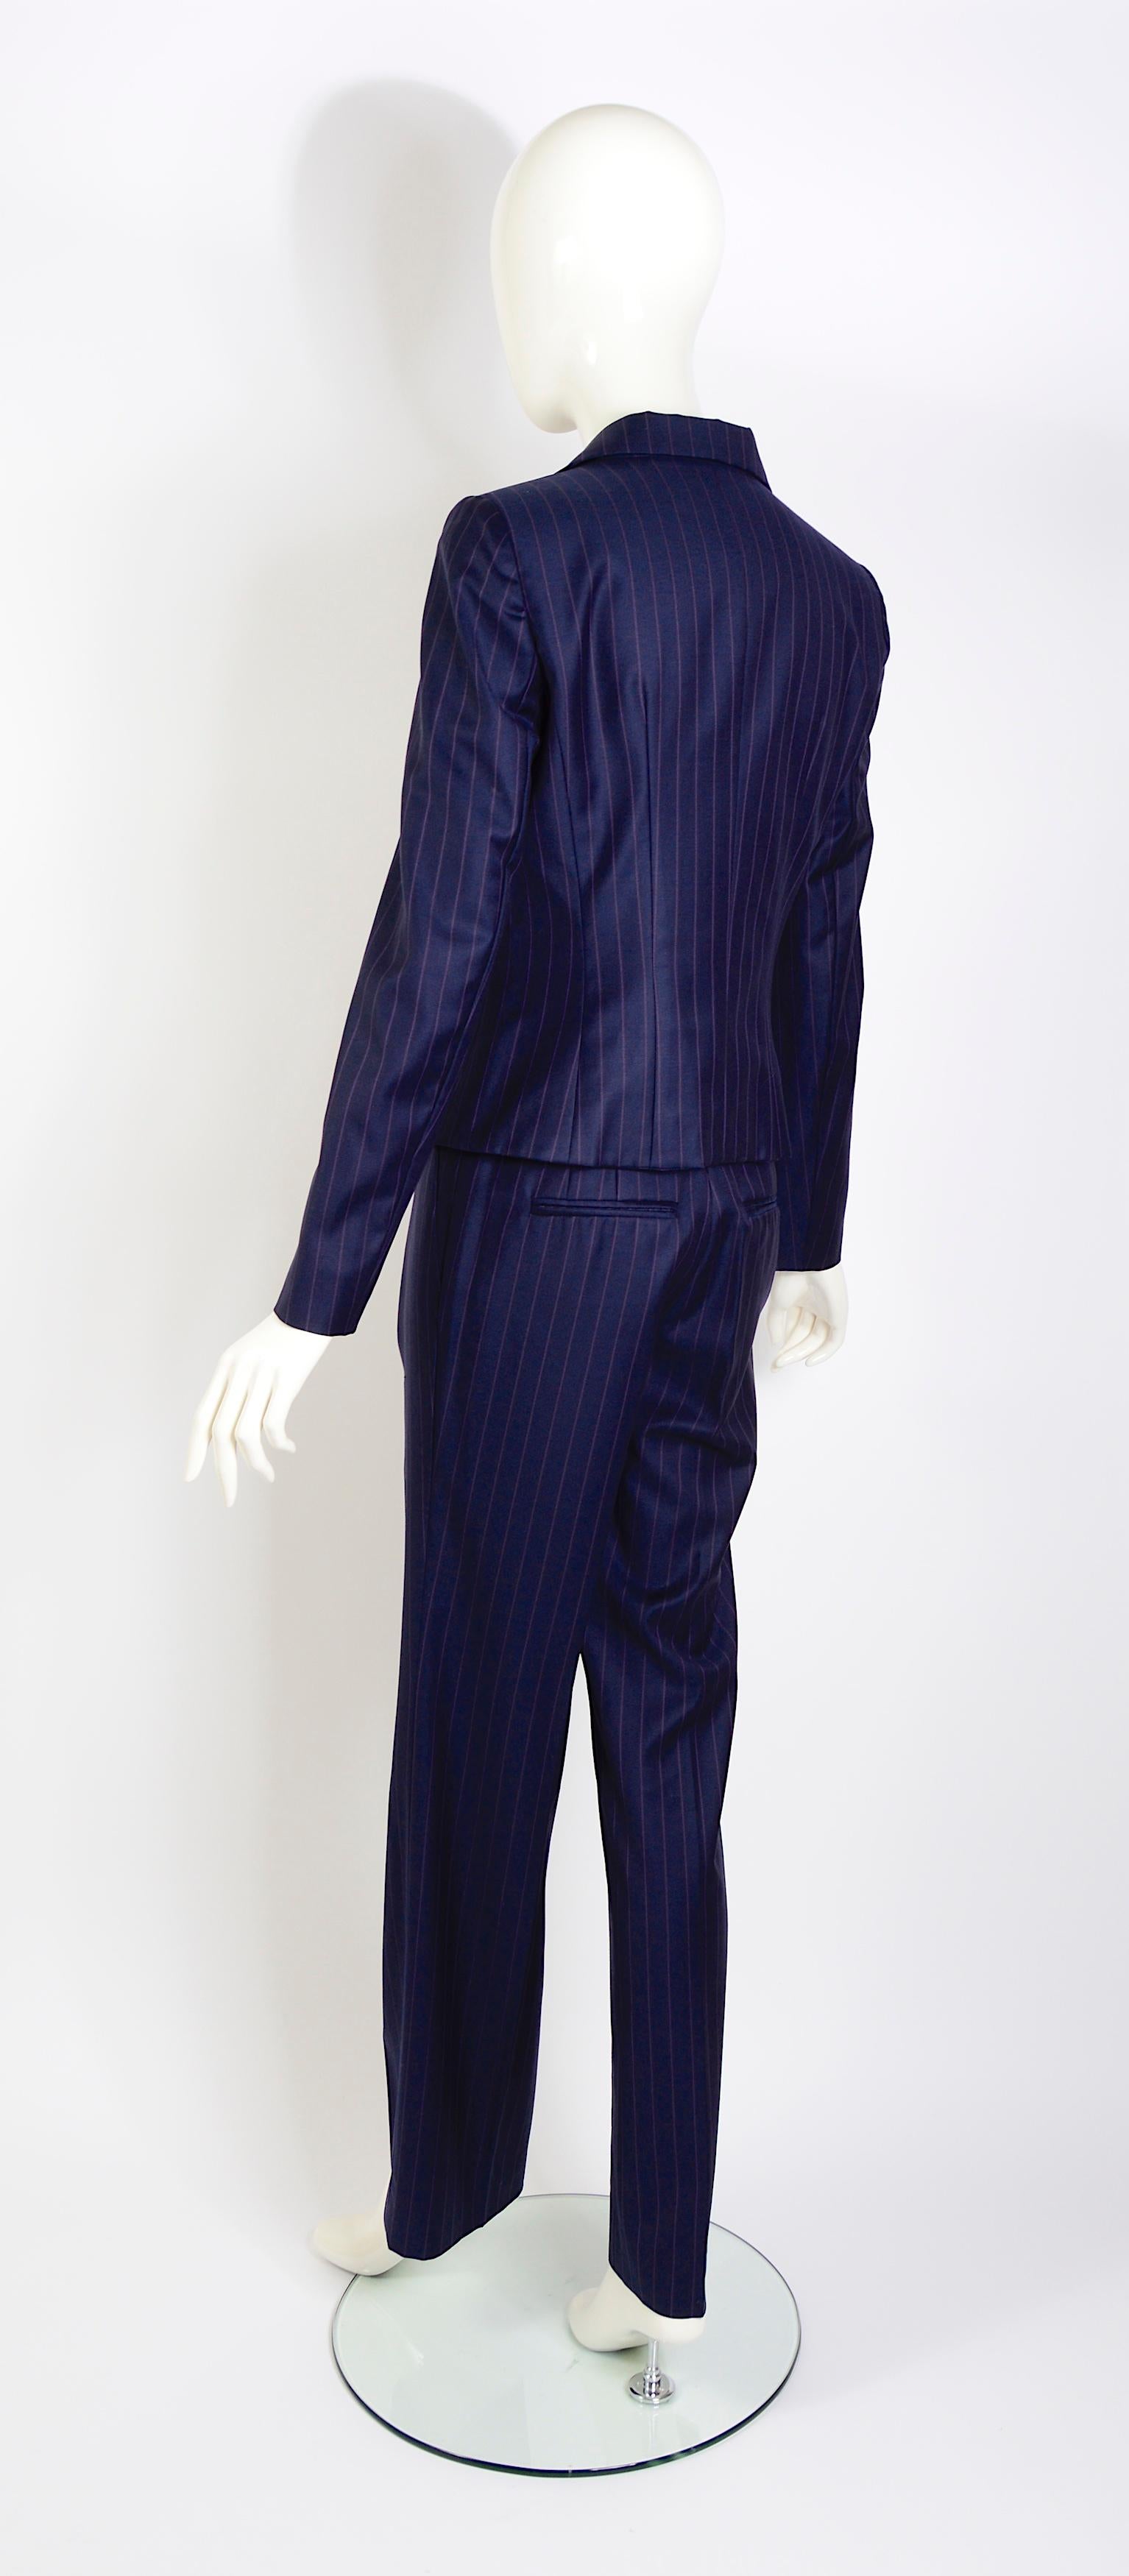 Christian Dior by John Galliano vintage S/S 2008 pin striped suit 2